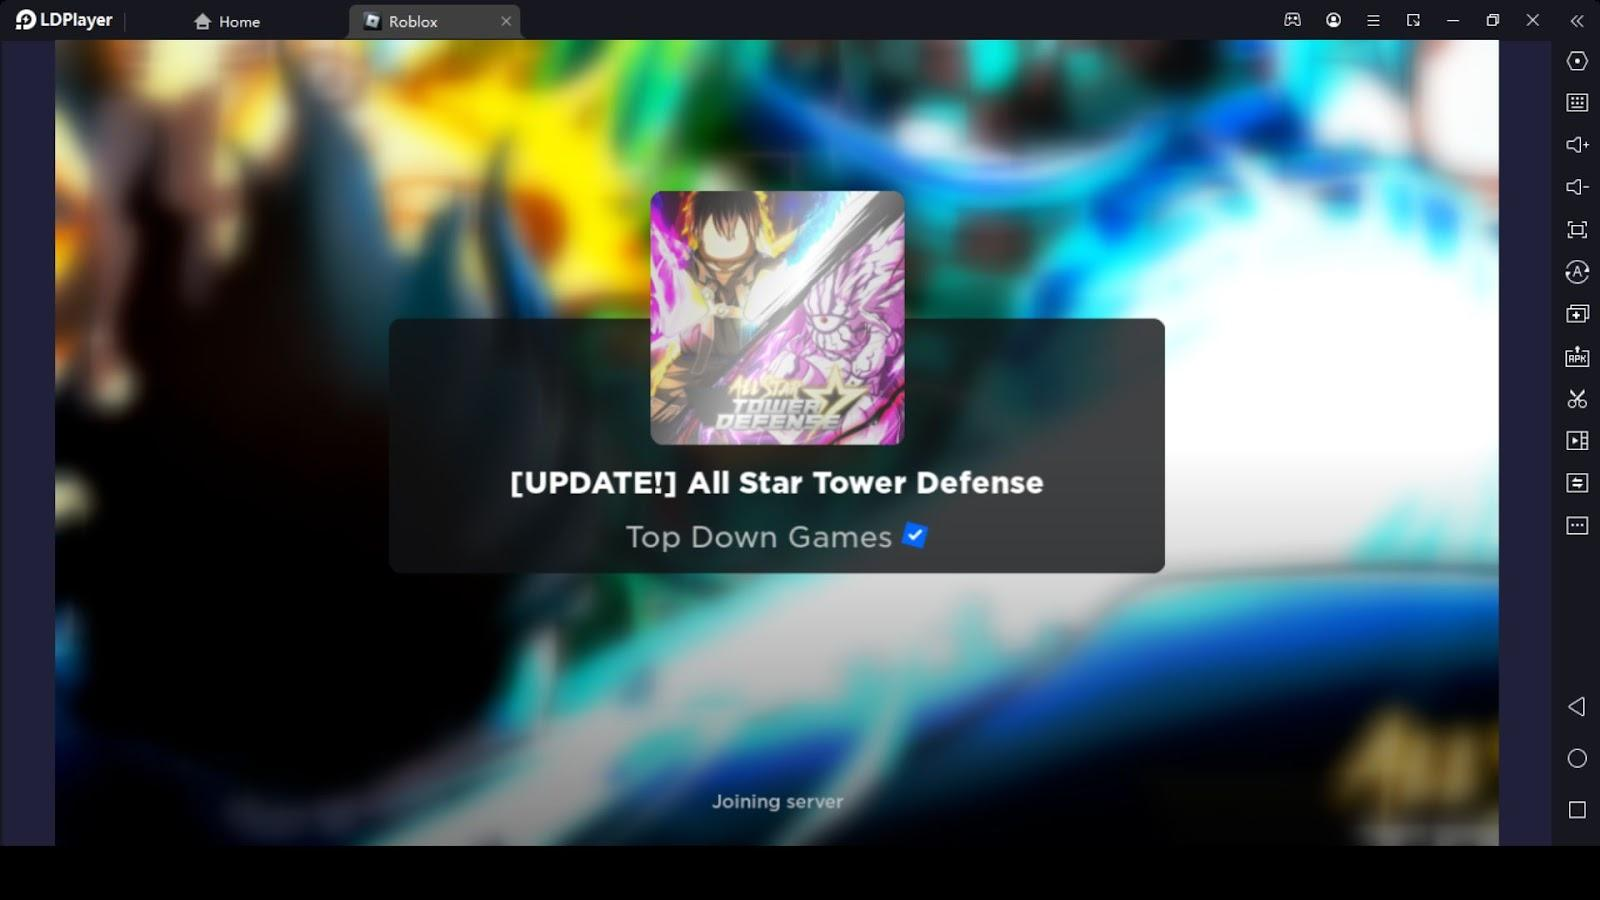 All Star Tower Defense codes